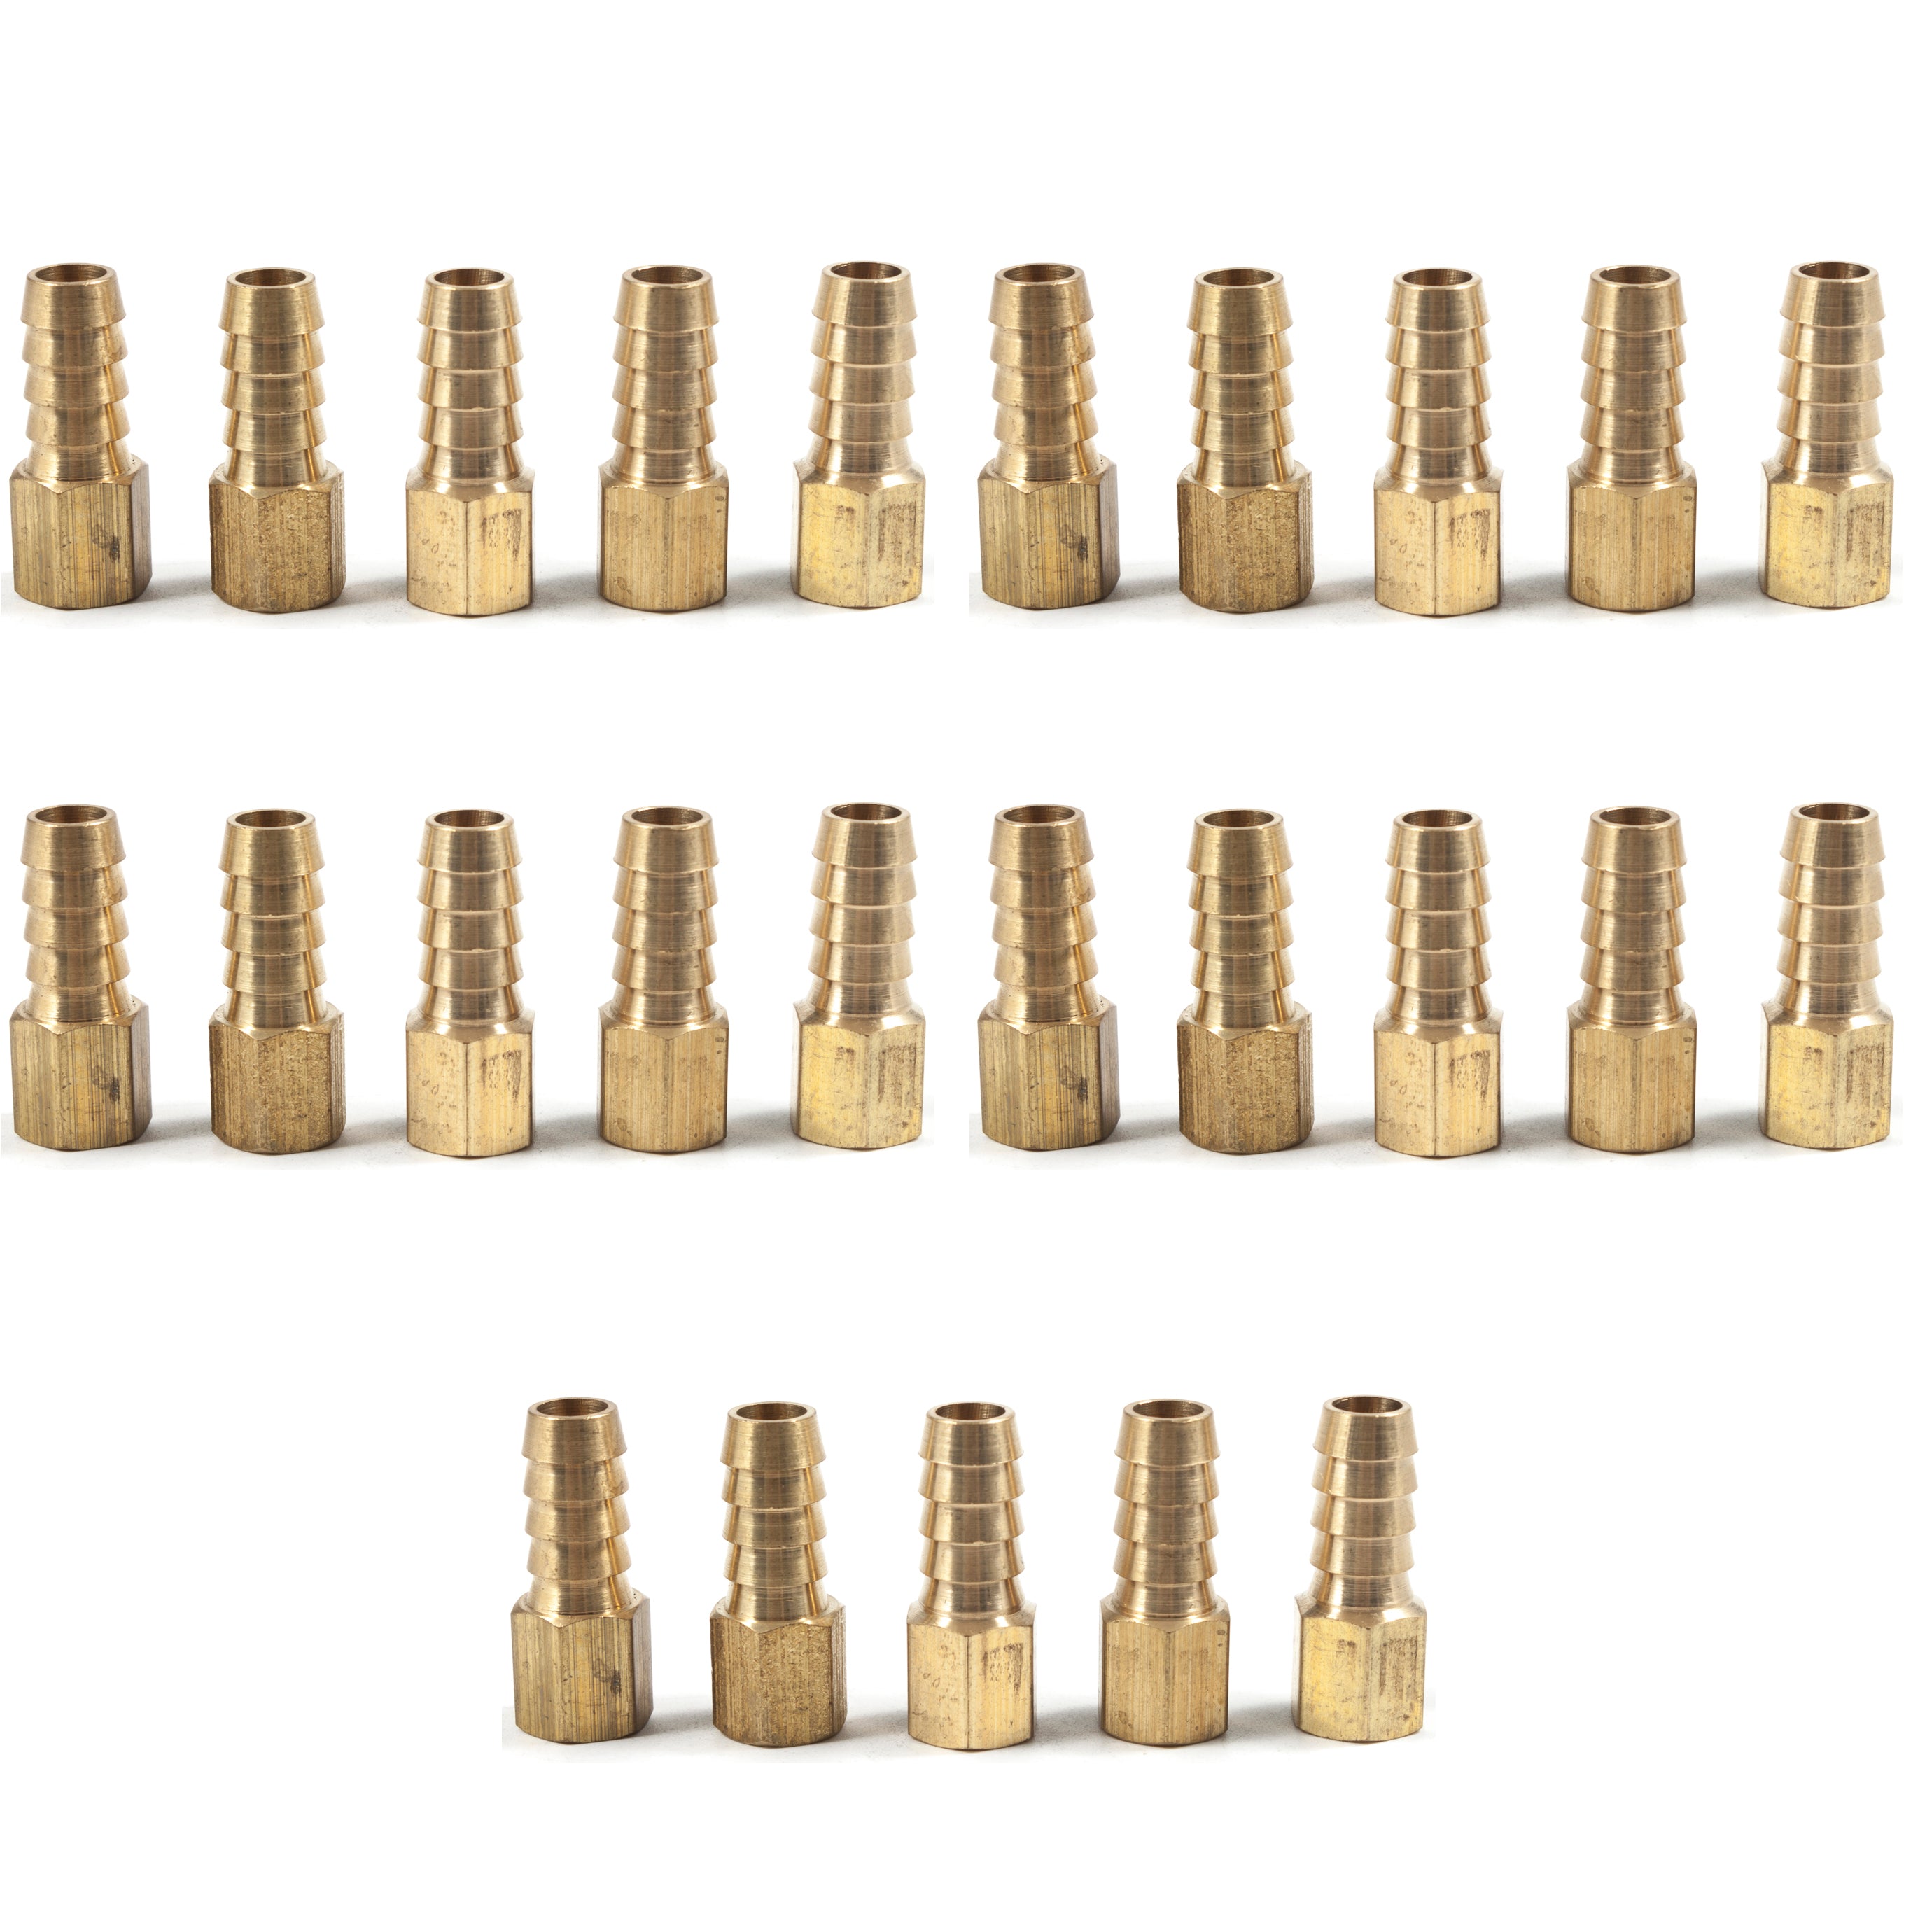 LTWFITTING Brass Fitting Coupler 3/8-Inch Hose Barb x 1/8-Inch Female NPT Fuel Water Boat(Pack of 25)